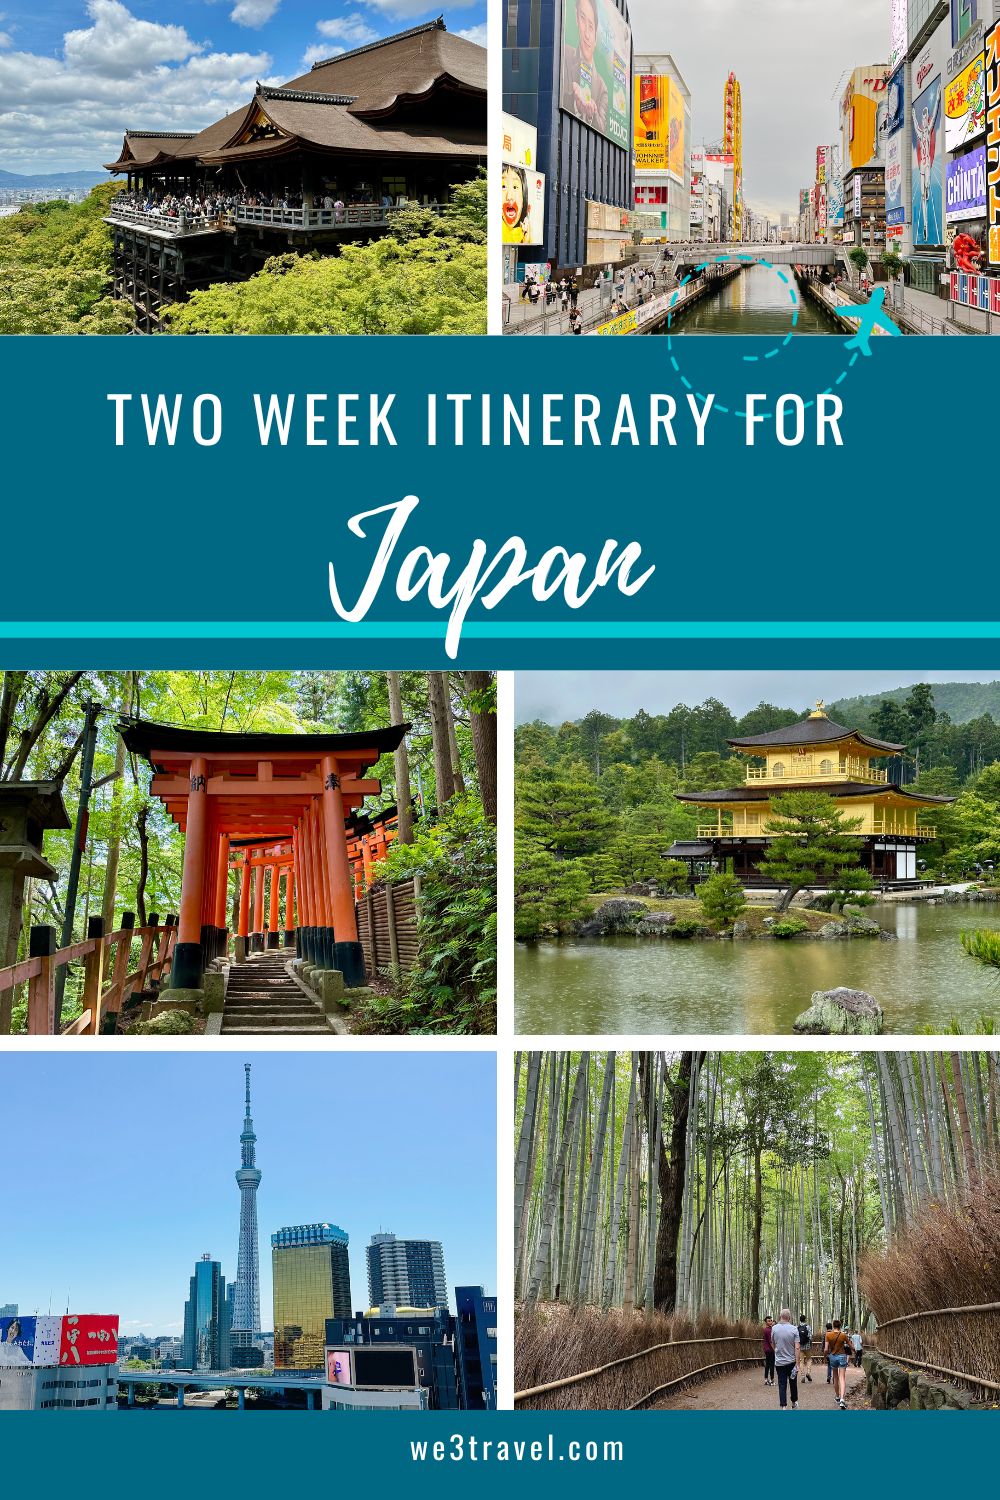 Planning a trip to Japan? This Japan itinerary gives a day-by-day guide for two weeks in Japan including visits to Tokyo, Kyoto, and Osaka with day trips to Nara, Hiroshima, and Miyajima. Perfect for your Japan vacation!